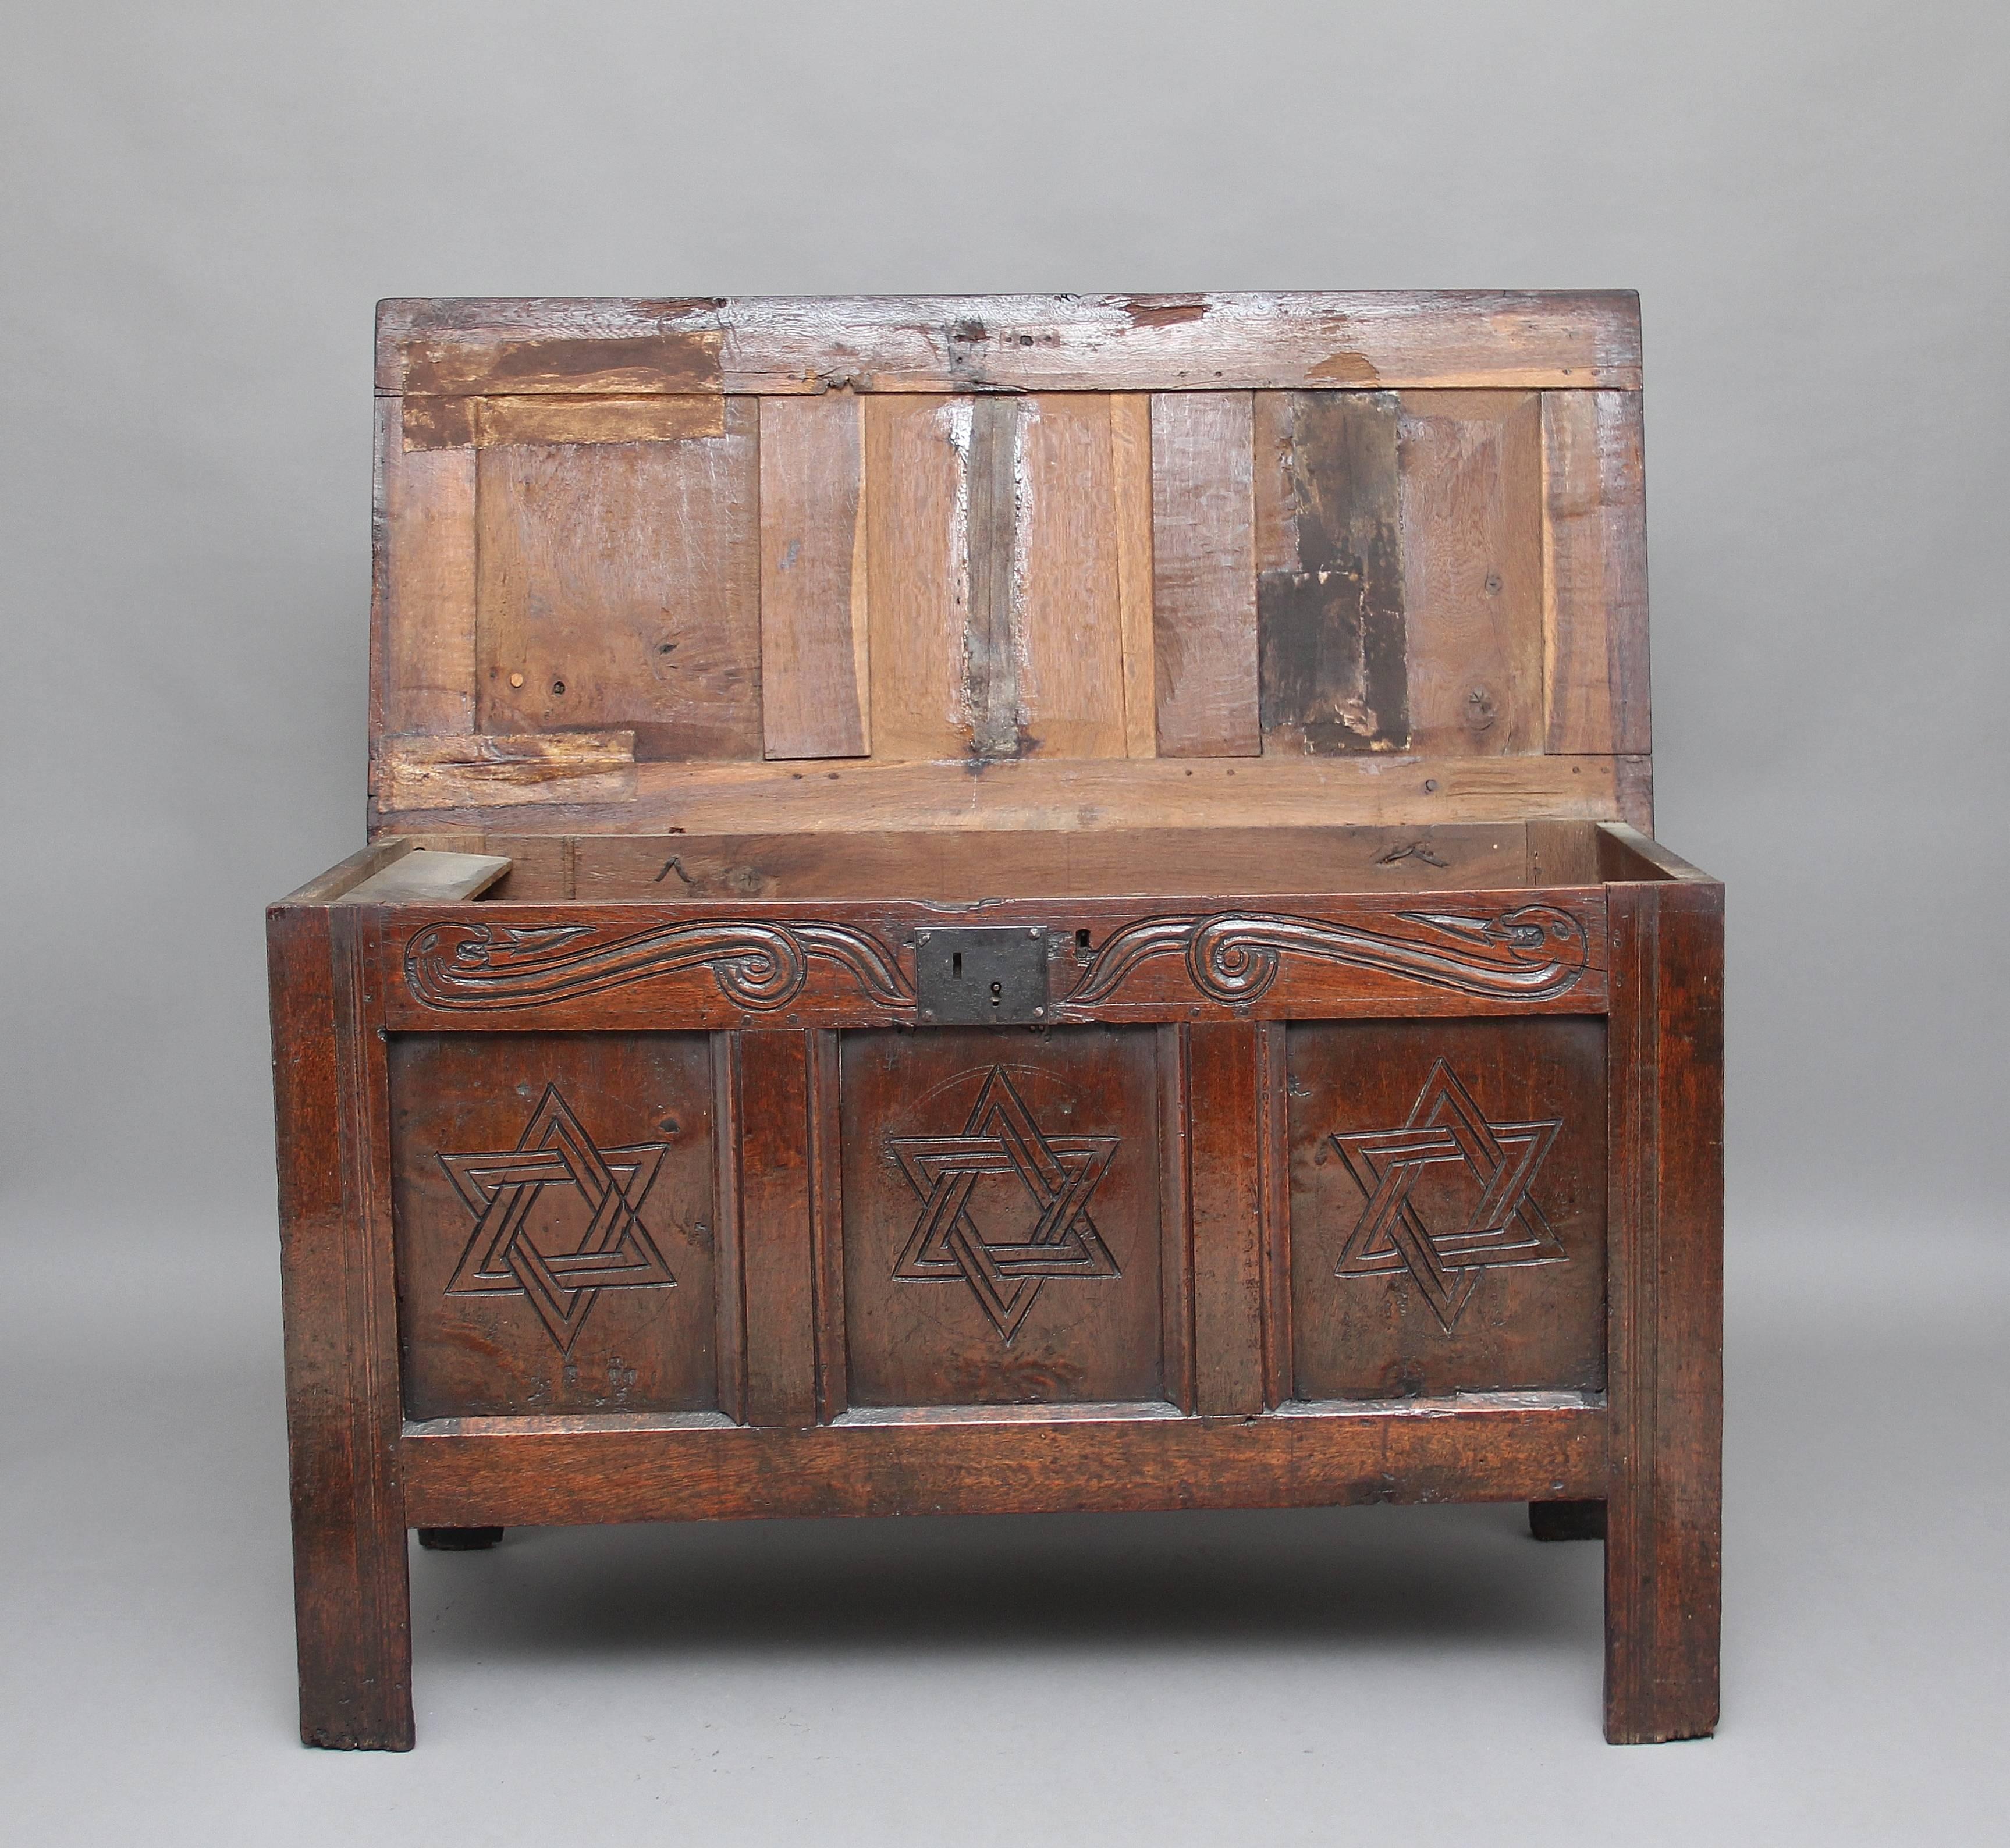 17th century oak coffer with the hinged three panelled top above a three panelled front with carved decoration, a wonderfully carved top rail above the three panelled front, standing on square legs, circa 1680.
     